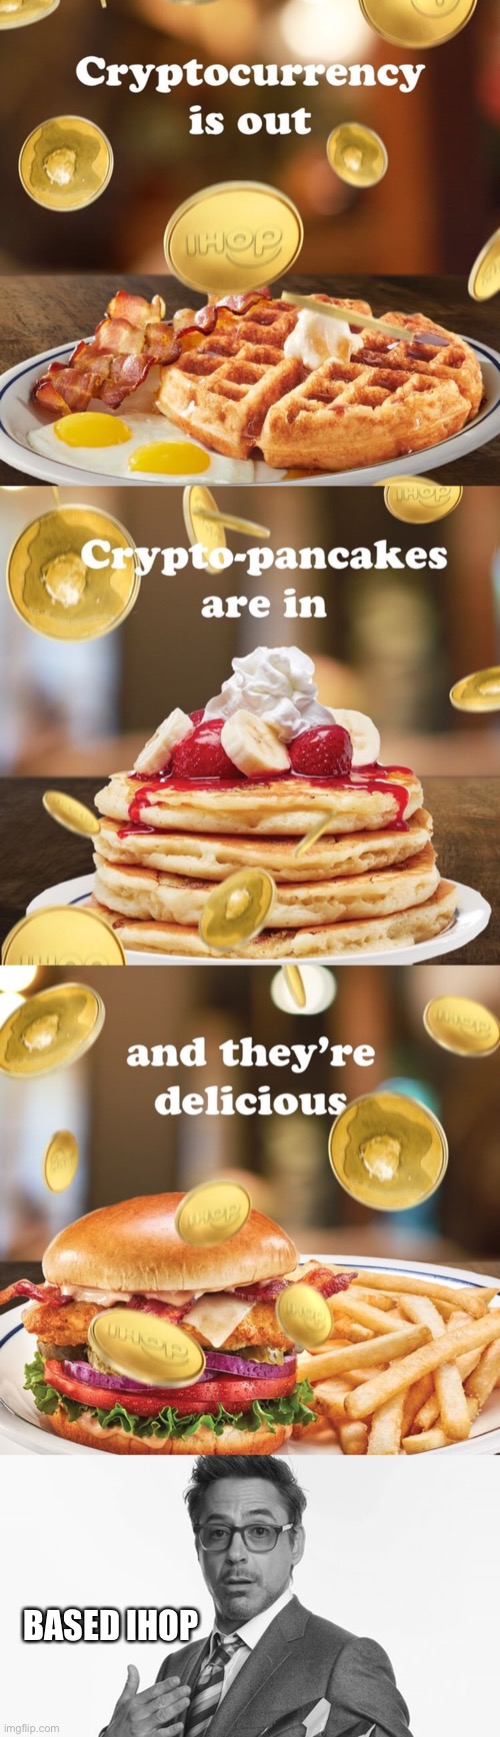 IHOP is officially based | BASED IHOP | image tagged in robert downey jr's comments,based,ihop,crypto,gen z humor | made w/ Imgflip meme maker